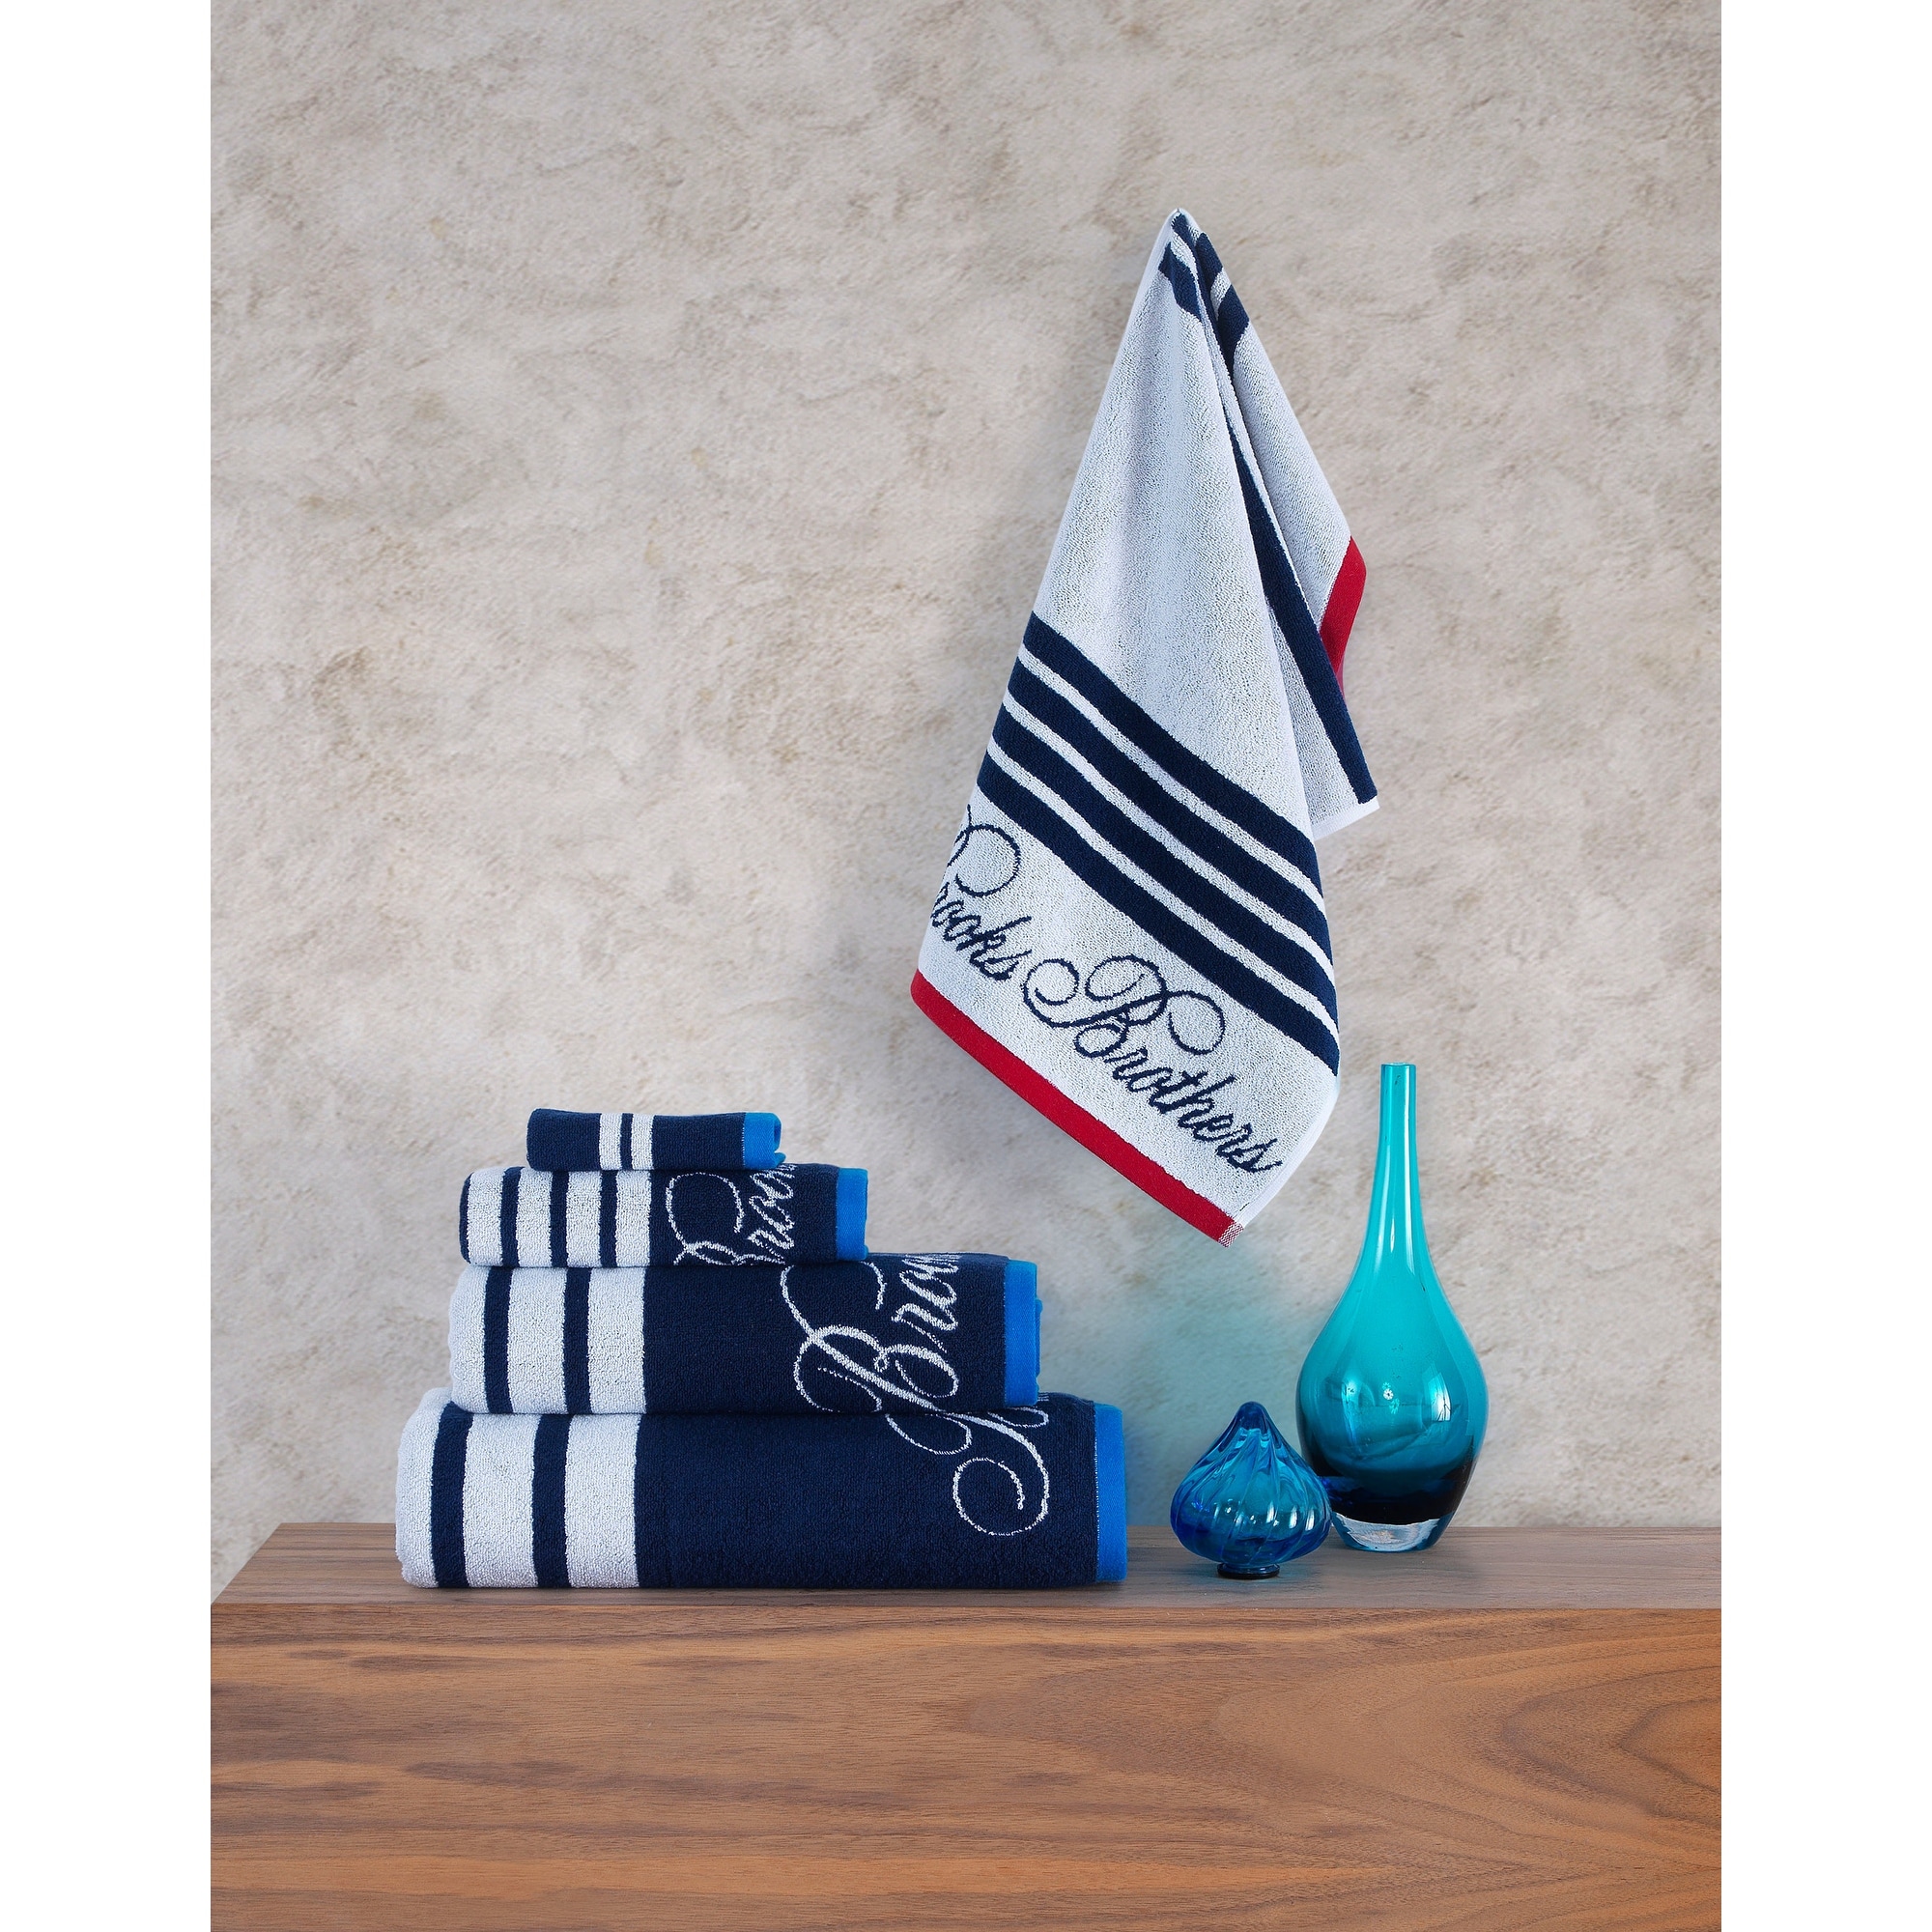 https://ak1.ostkcdn.com/images/products/is/images/direct/a8a65ed23ed360007e8d48714b5d7a998c167525/Brooks-Brothers-Nautical-Blanket-Stripe-4-pcs-Hand-Towels.jpg